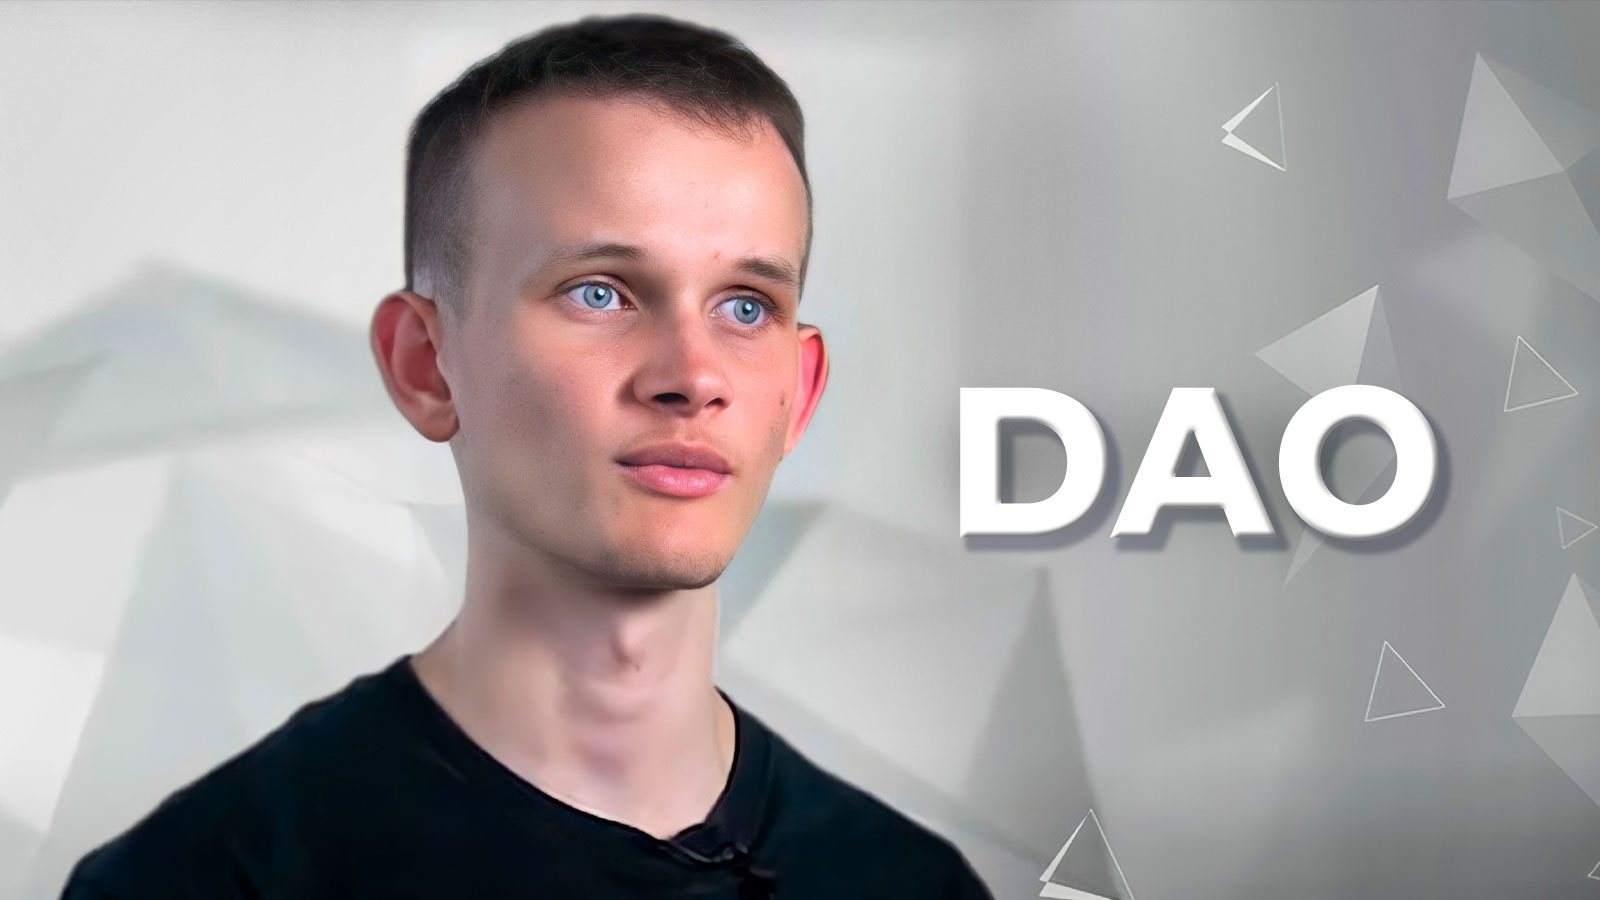 Ethereum's Vitalik Buterin Explains Why DAOs Are Not Supposed to Function as Corporations